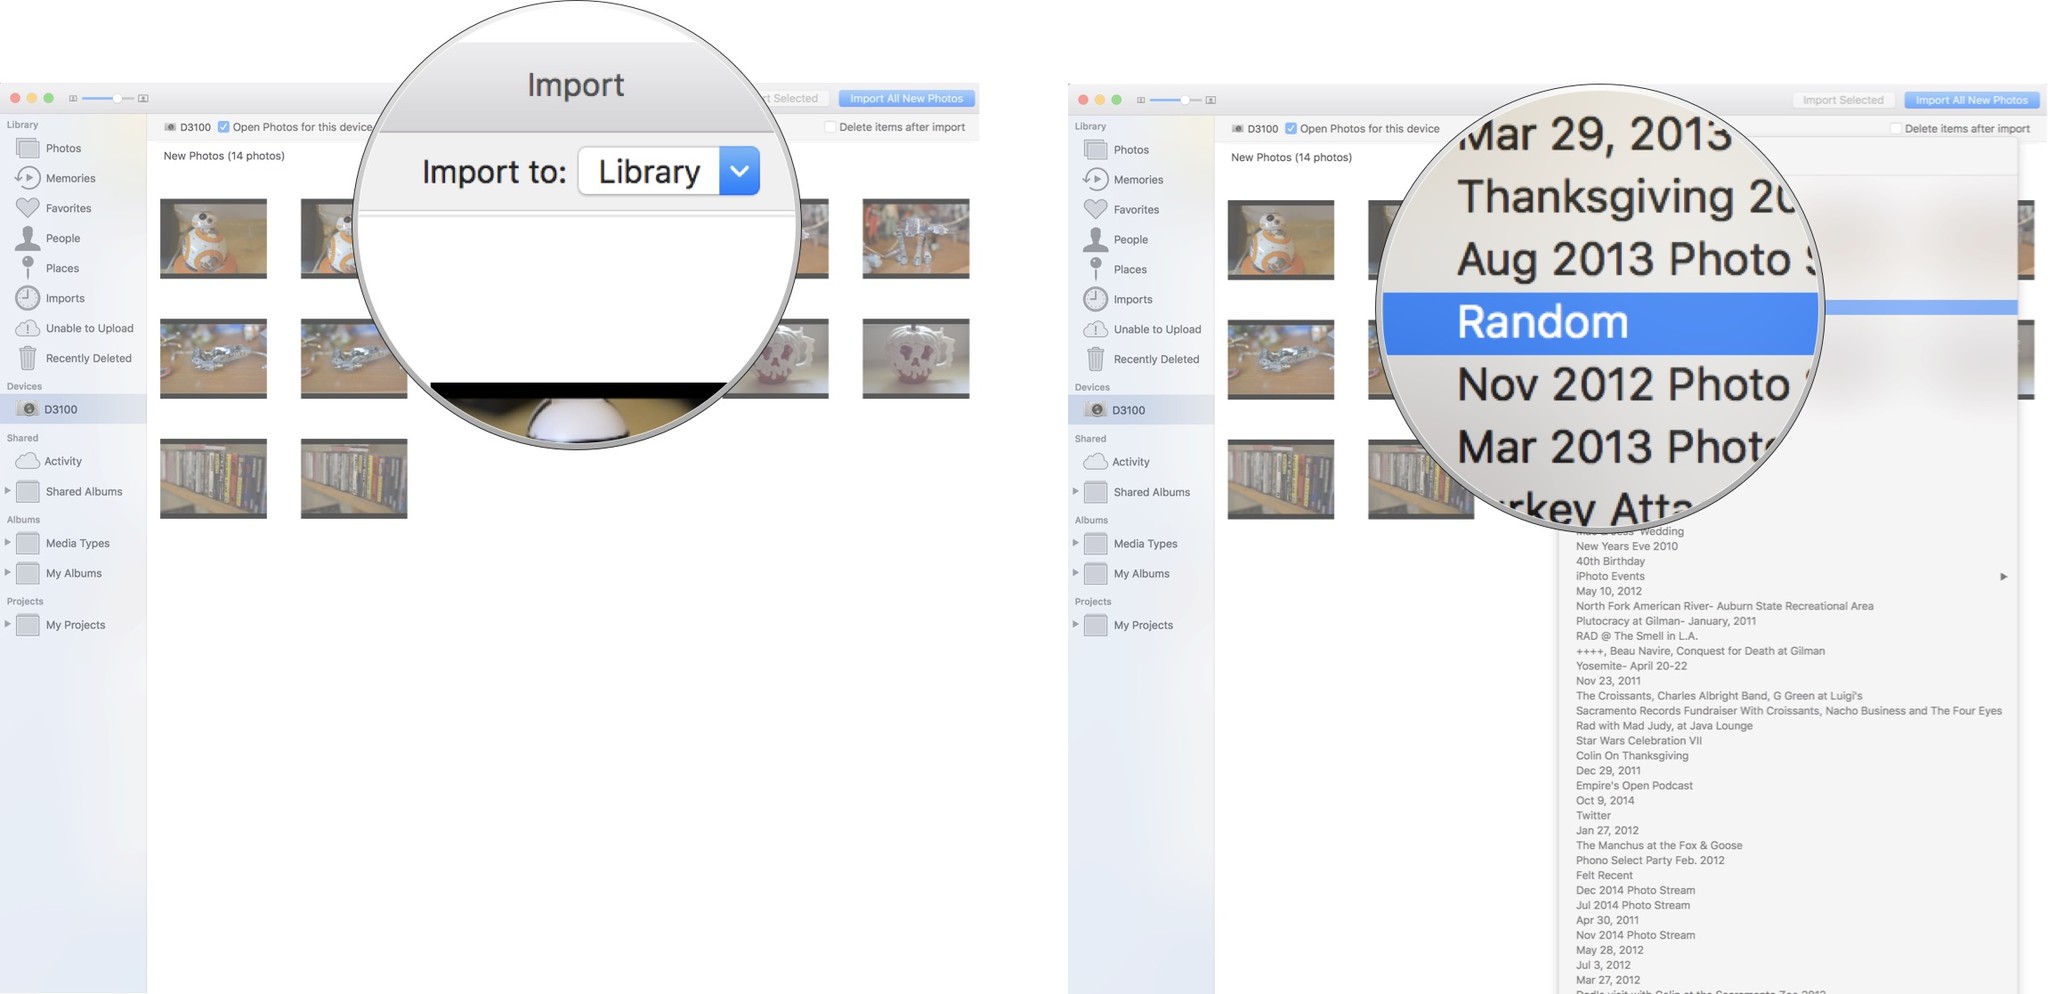 Select folder for imported photos: Click on Library, then click on an album folder